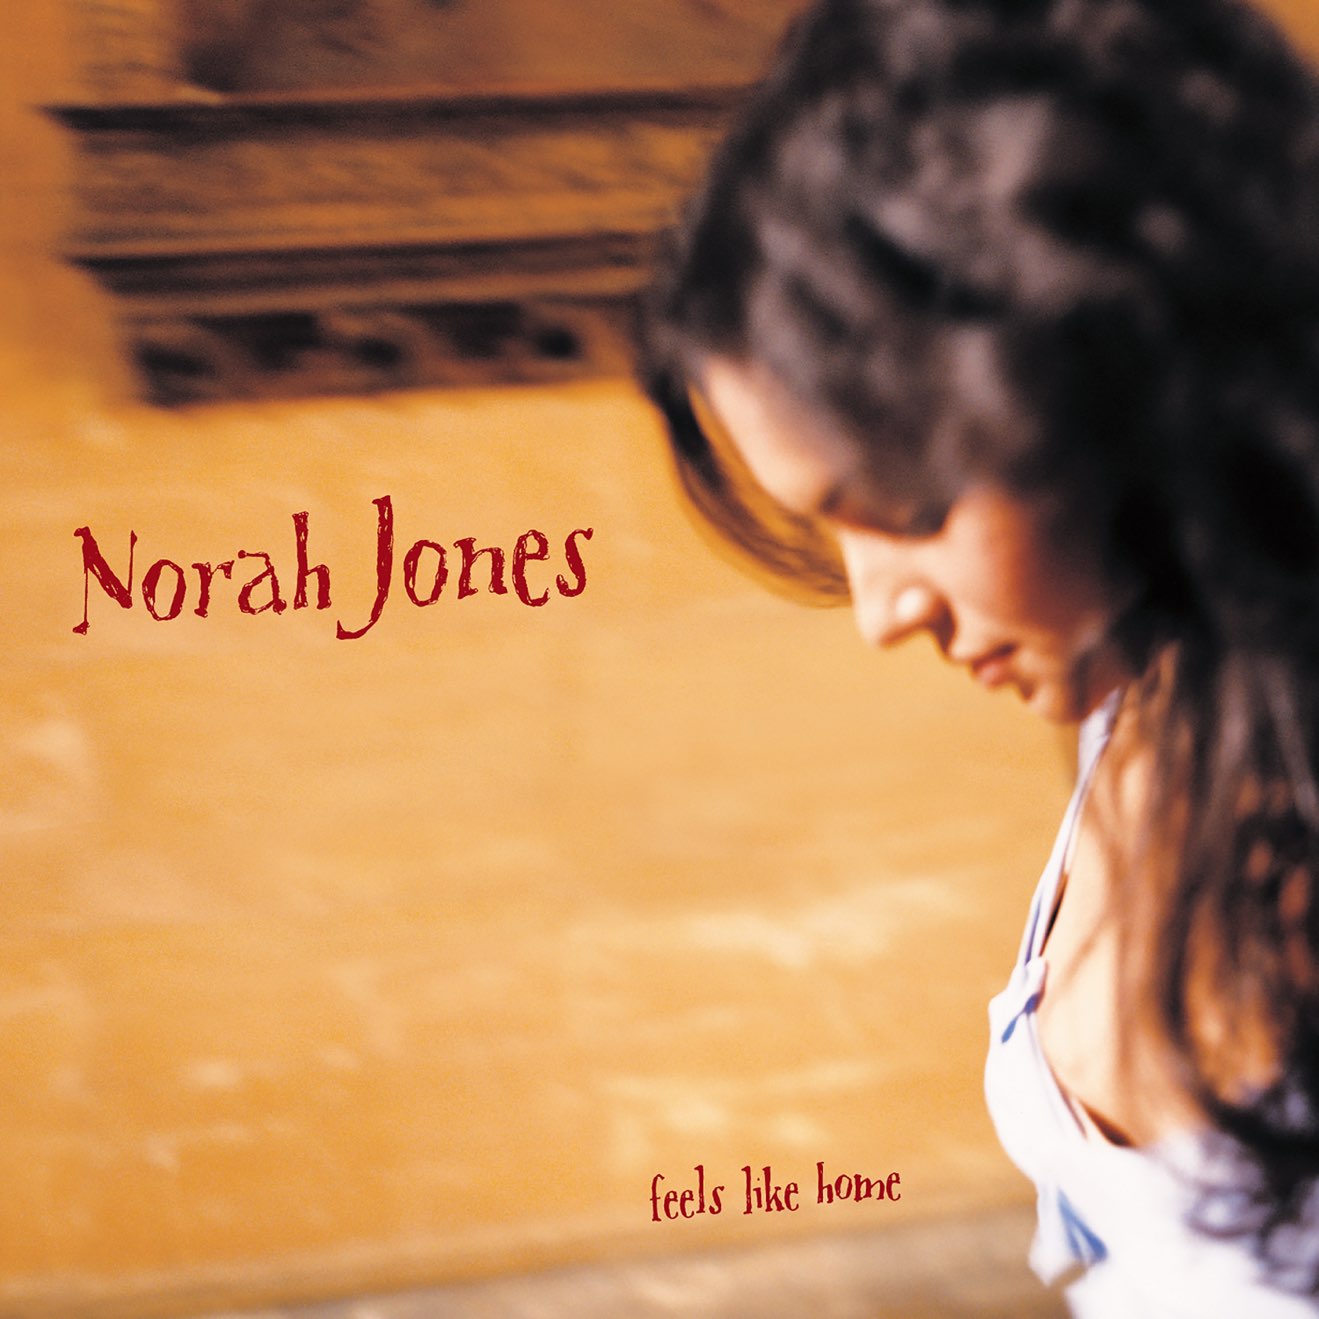 Norah Jones – Feels Like Home (Deluxe Edition) (2004) [iTunes Match M4A]